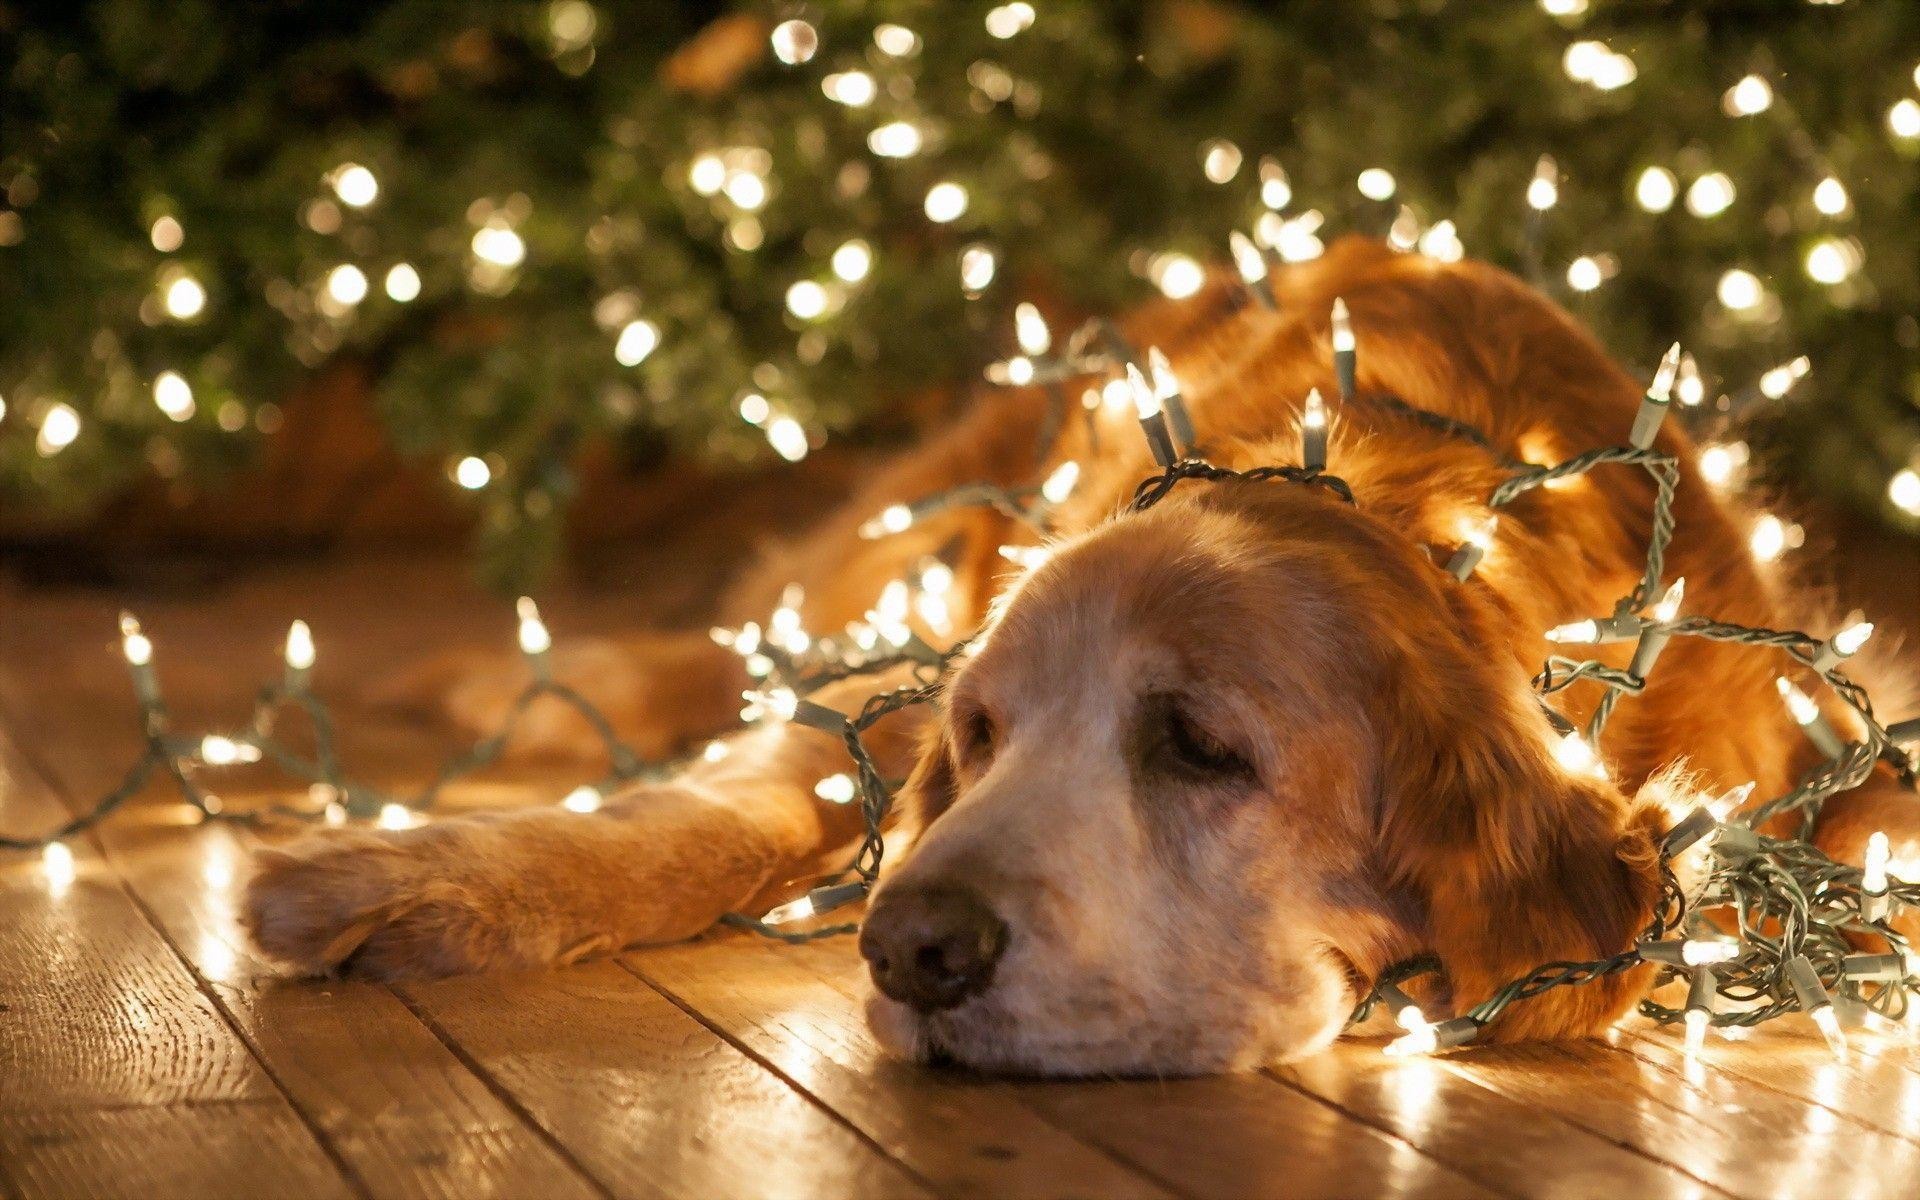 1920x1200 Christmas dog wallpapers and images - wallpapers, pictures, photos